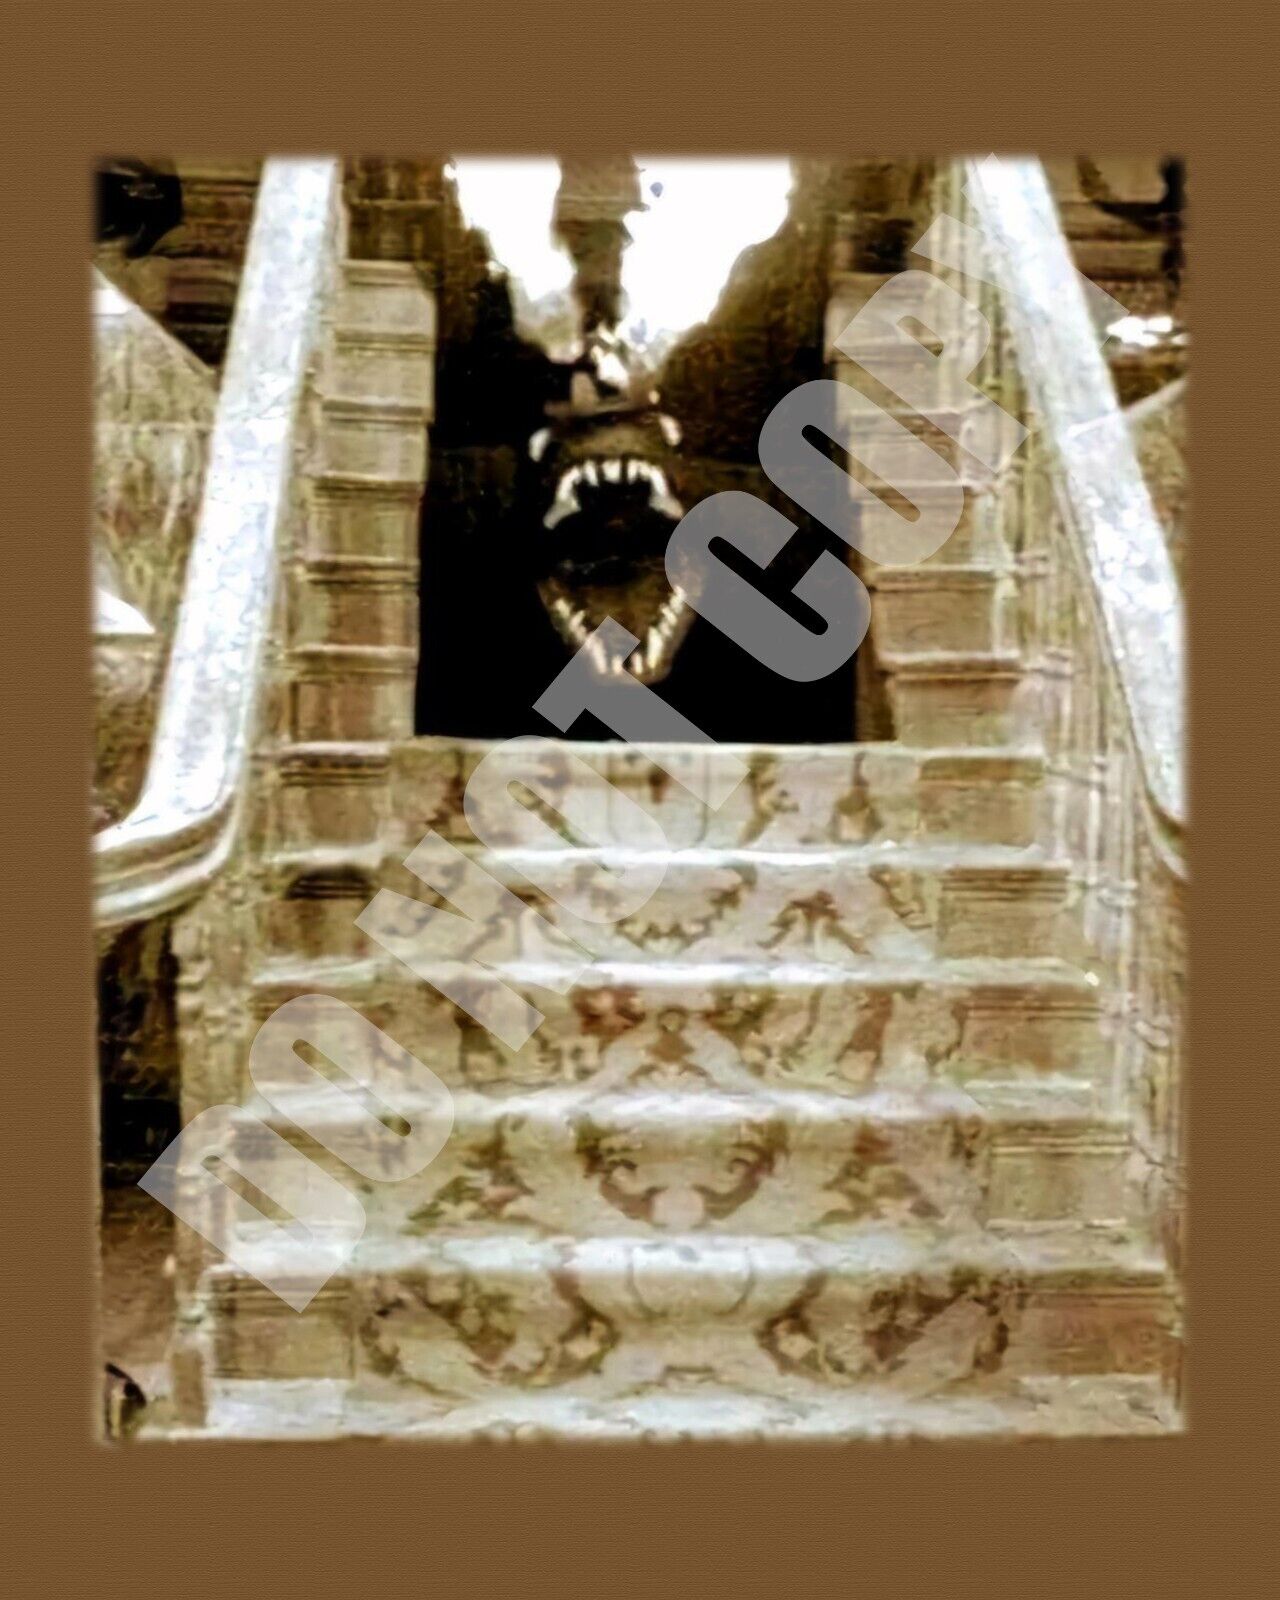 1960s The Munsters TV Show Spot the Dragon In Staircase 8x10 Photo